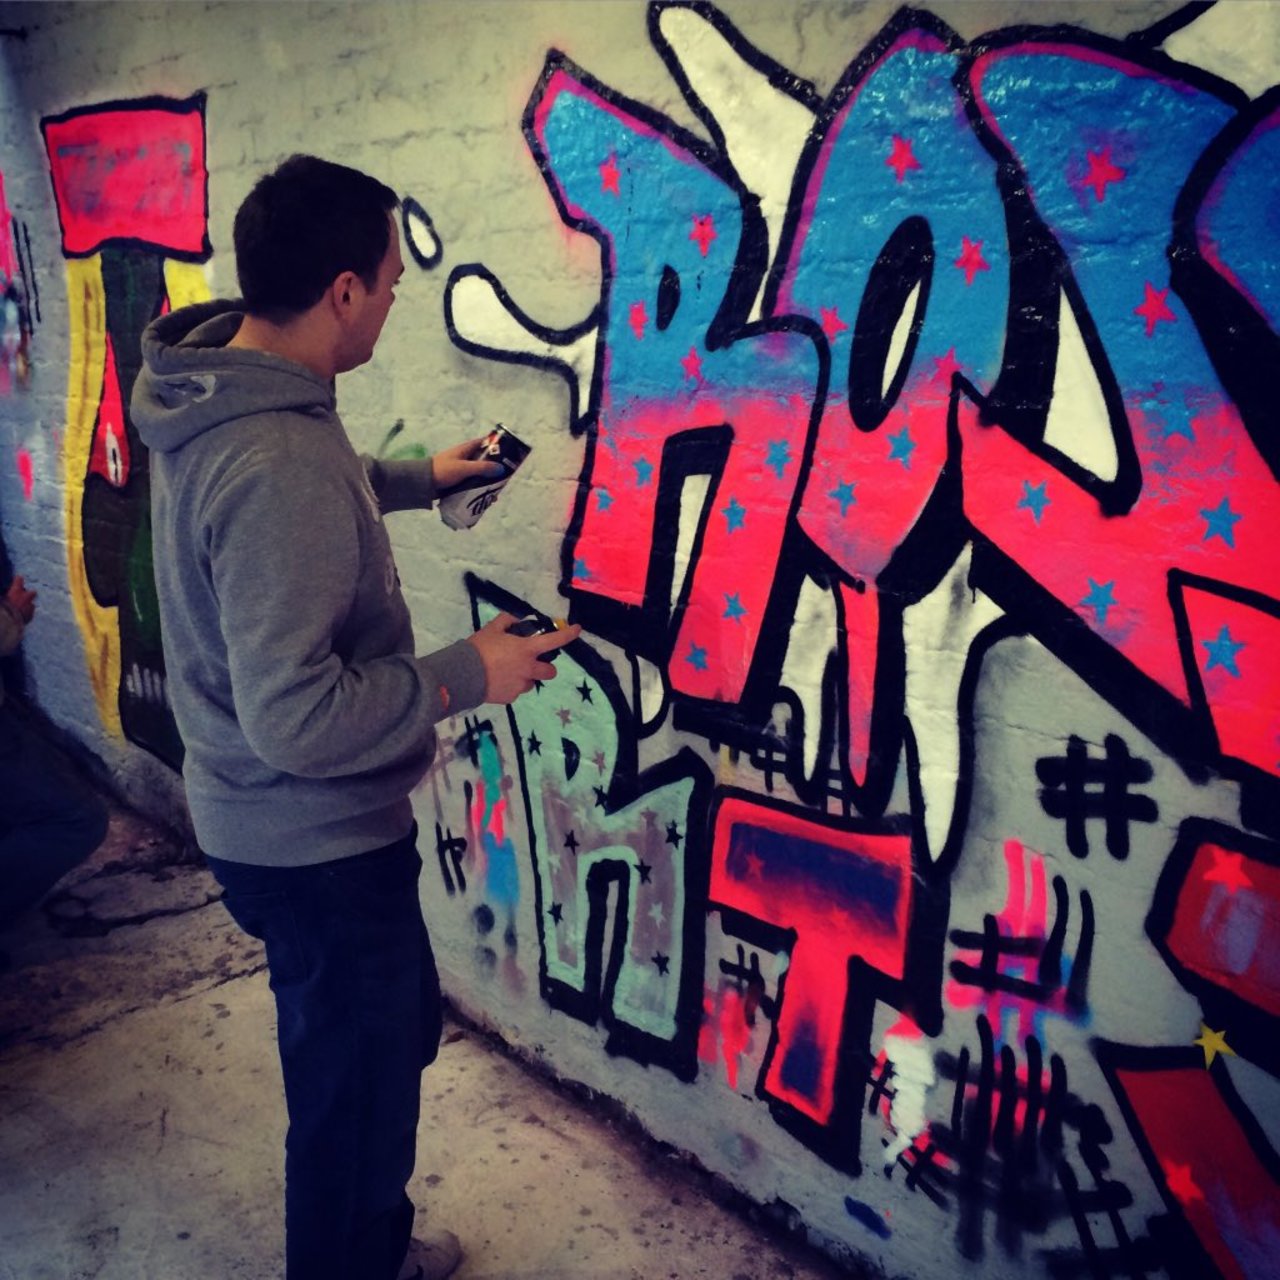 How's coming to next months #graffiti classes? http://www.thecontemporarychester.com/product-category/graffiti-classes/ #art#contemporary #popadt #streetart https://t.co/ZpkDbjos7c